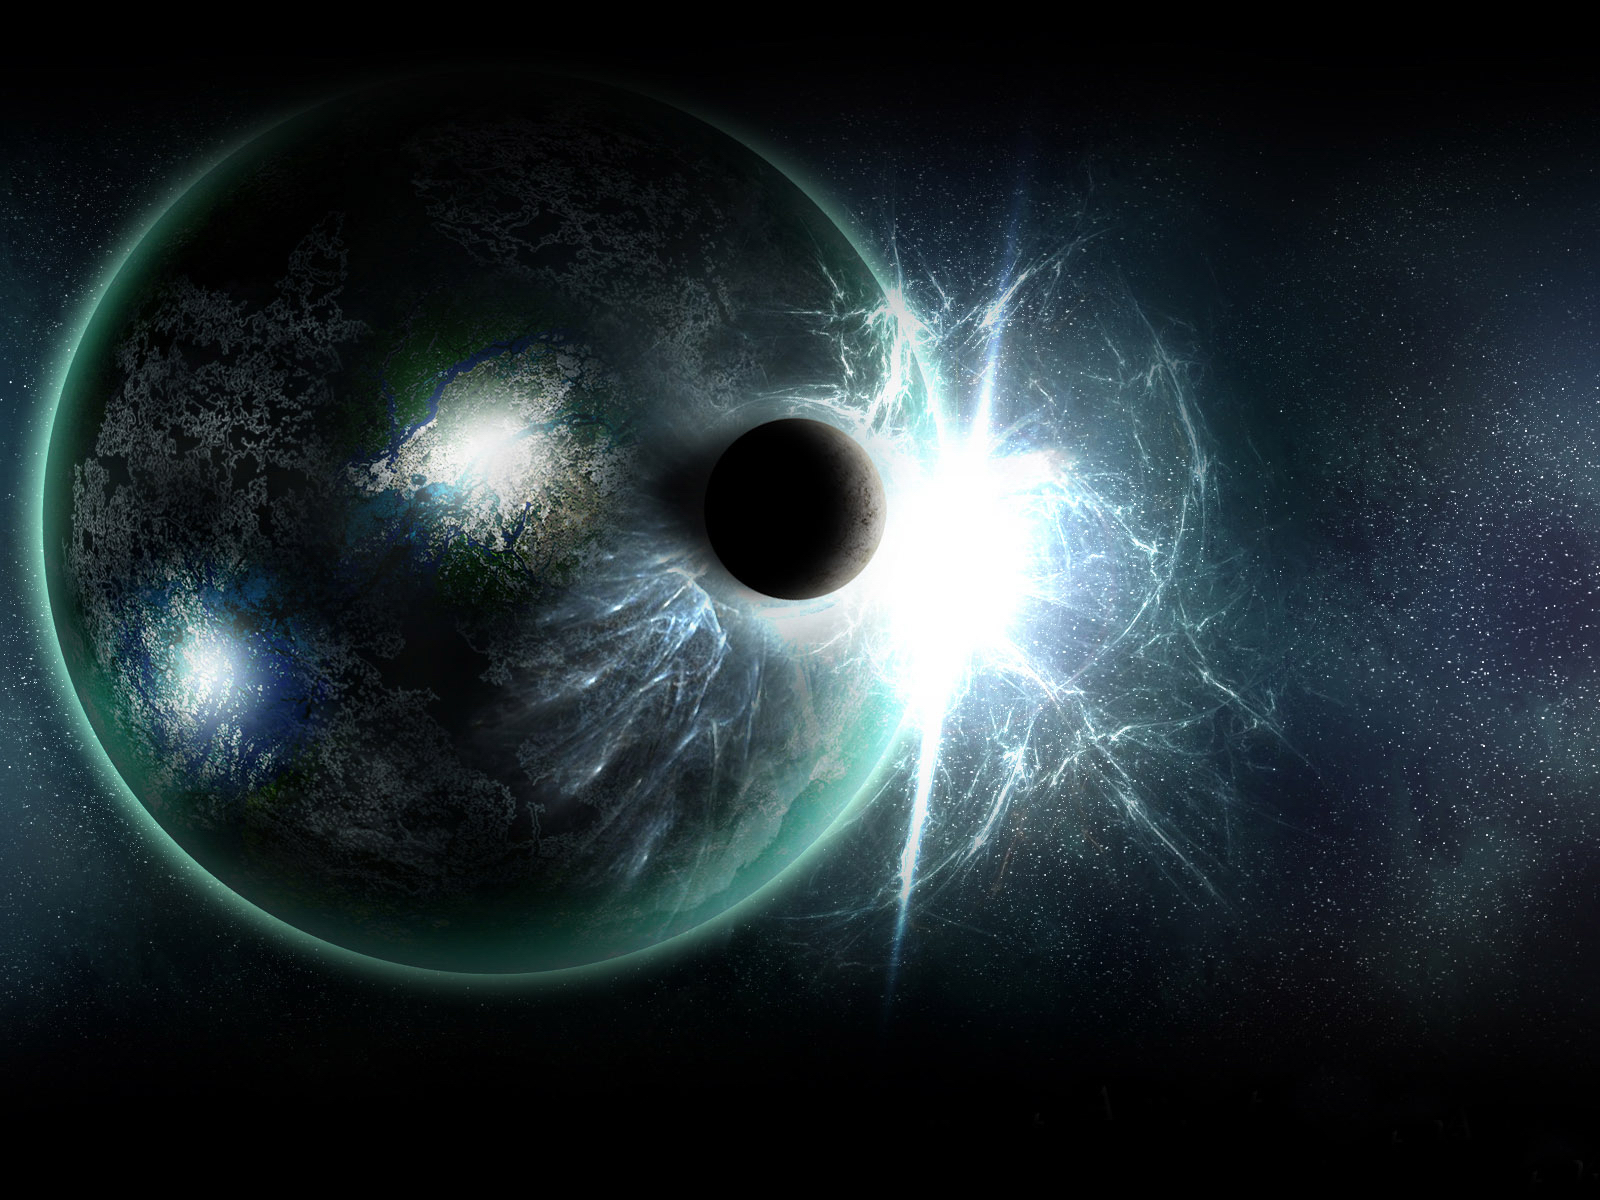 space wallpapers hd 1080p space wallpapers hd 1080p space wallpapers 1600x1200